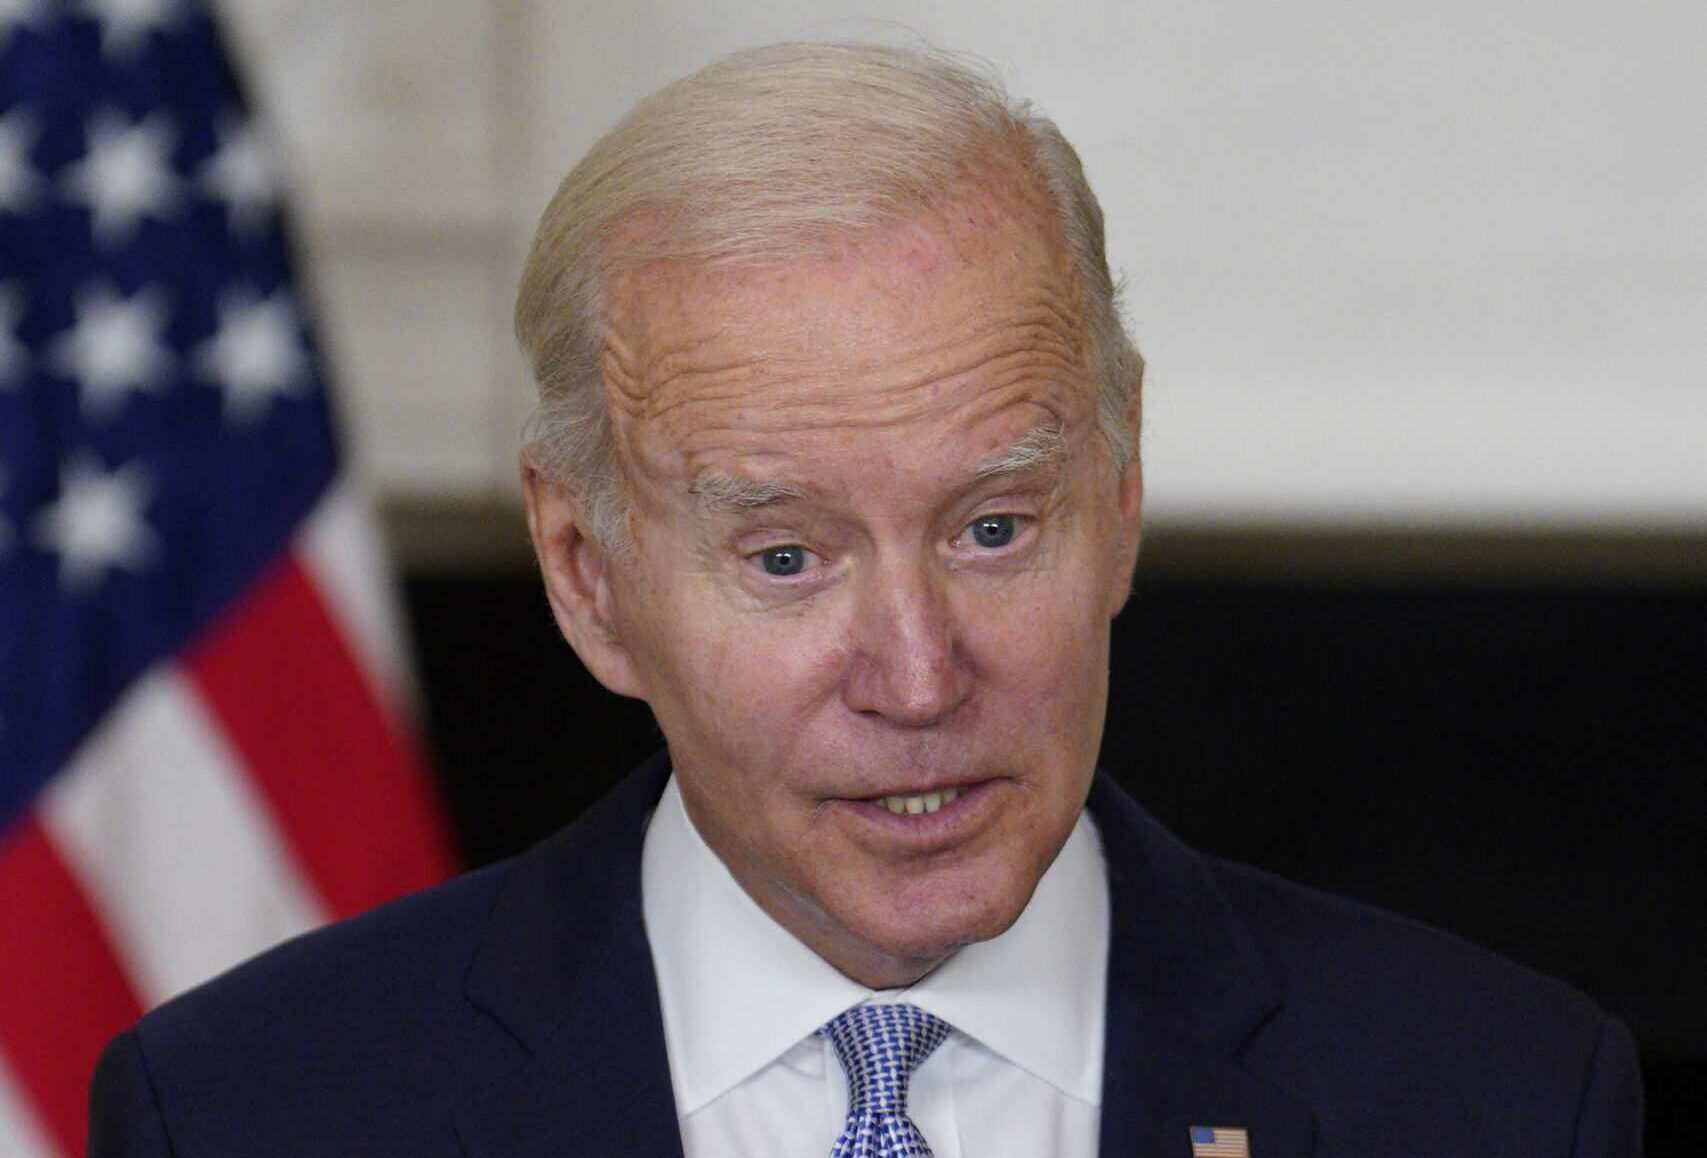 Biden says banking system is safe, blames Trump for Silicon Valley Bank failure